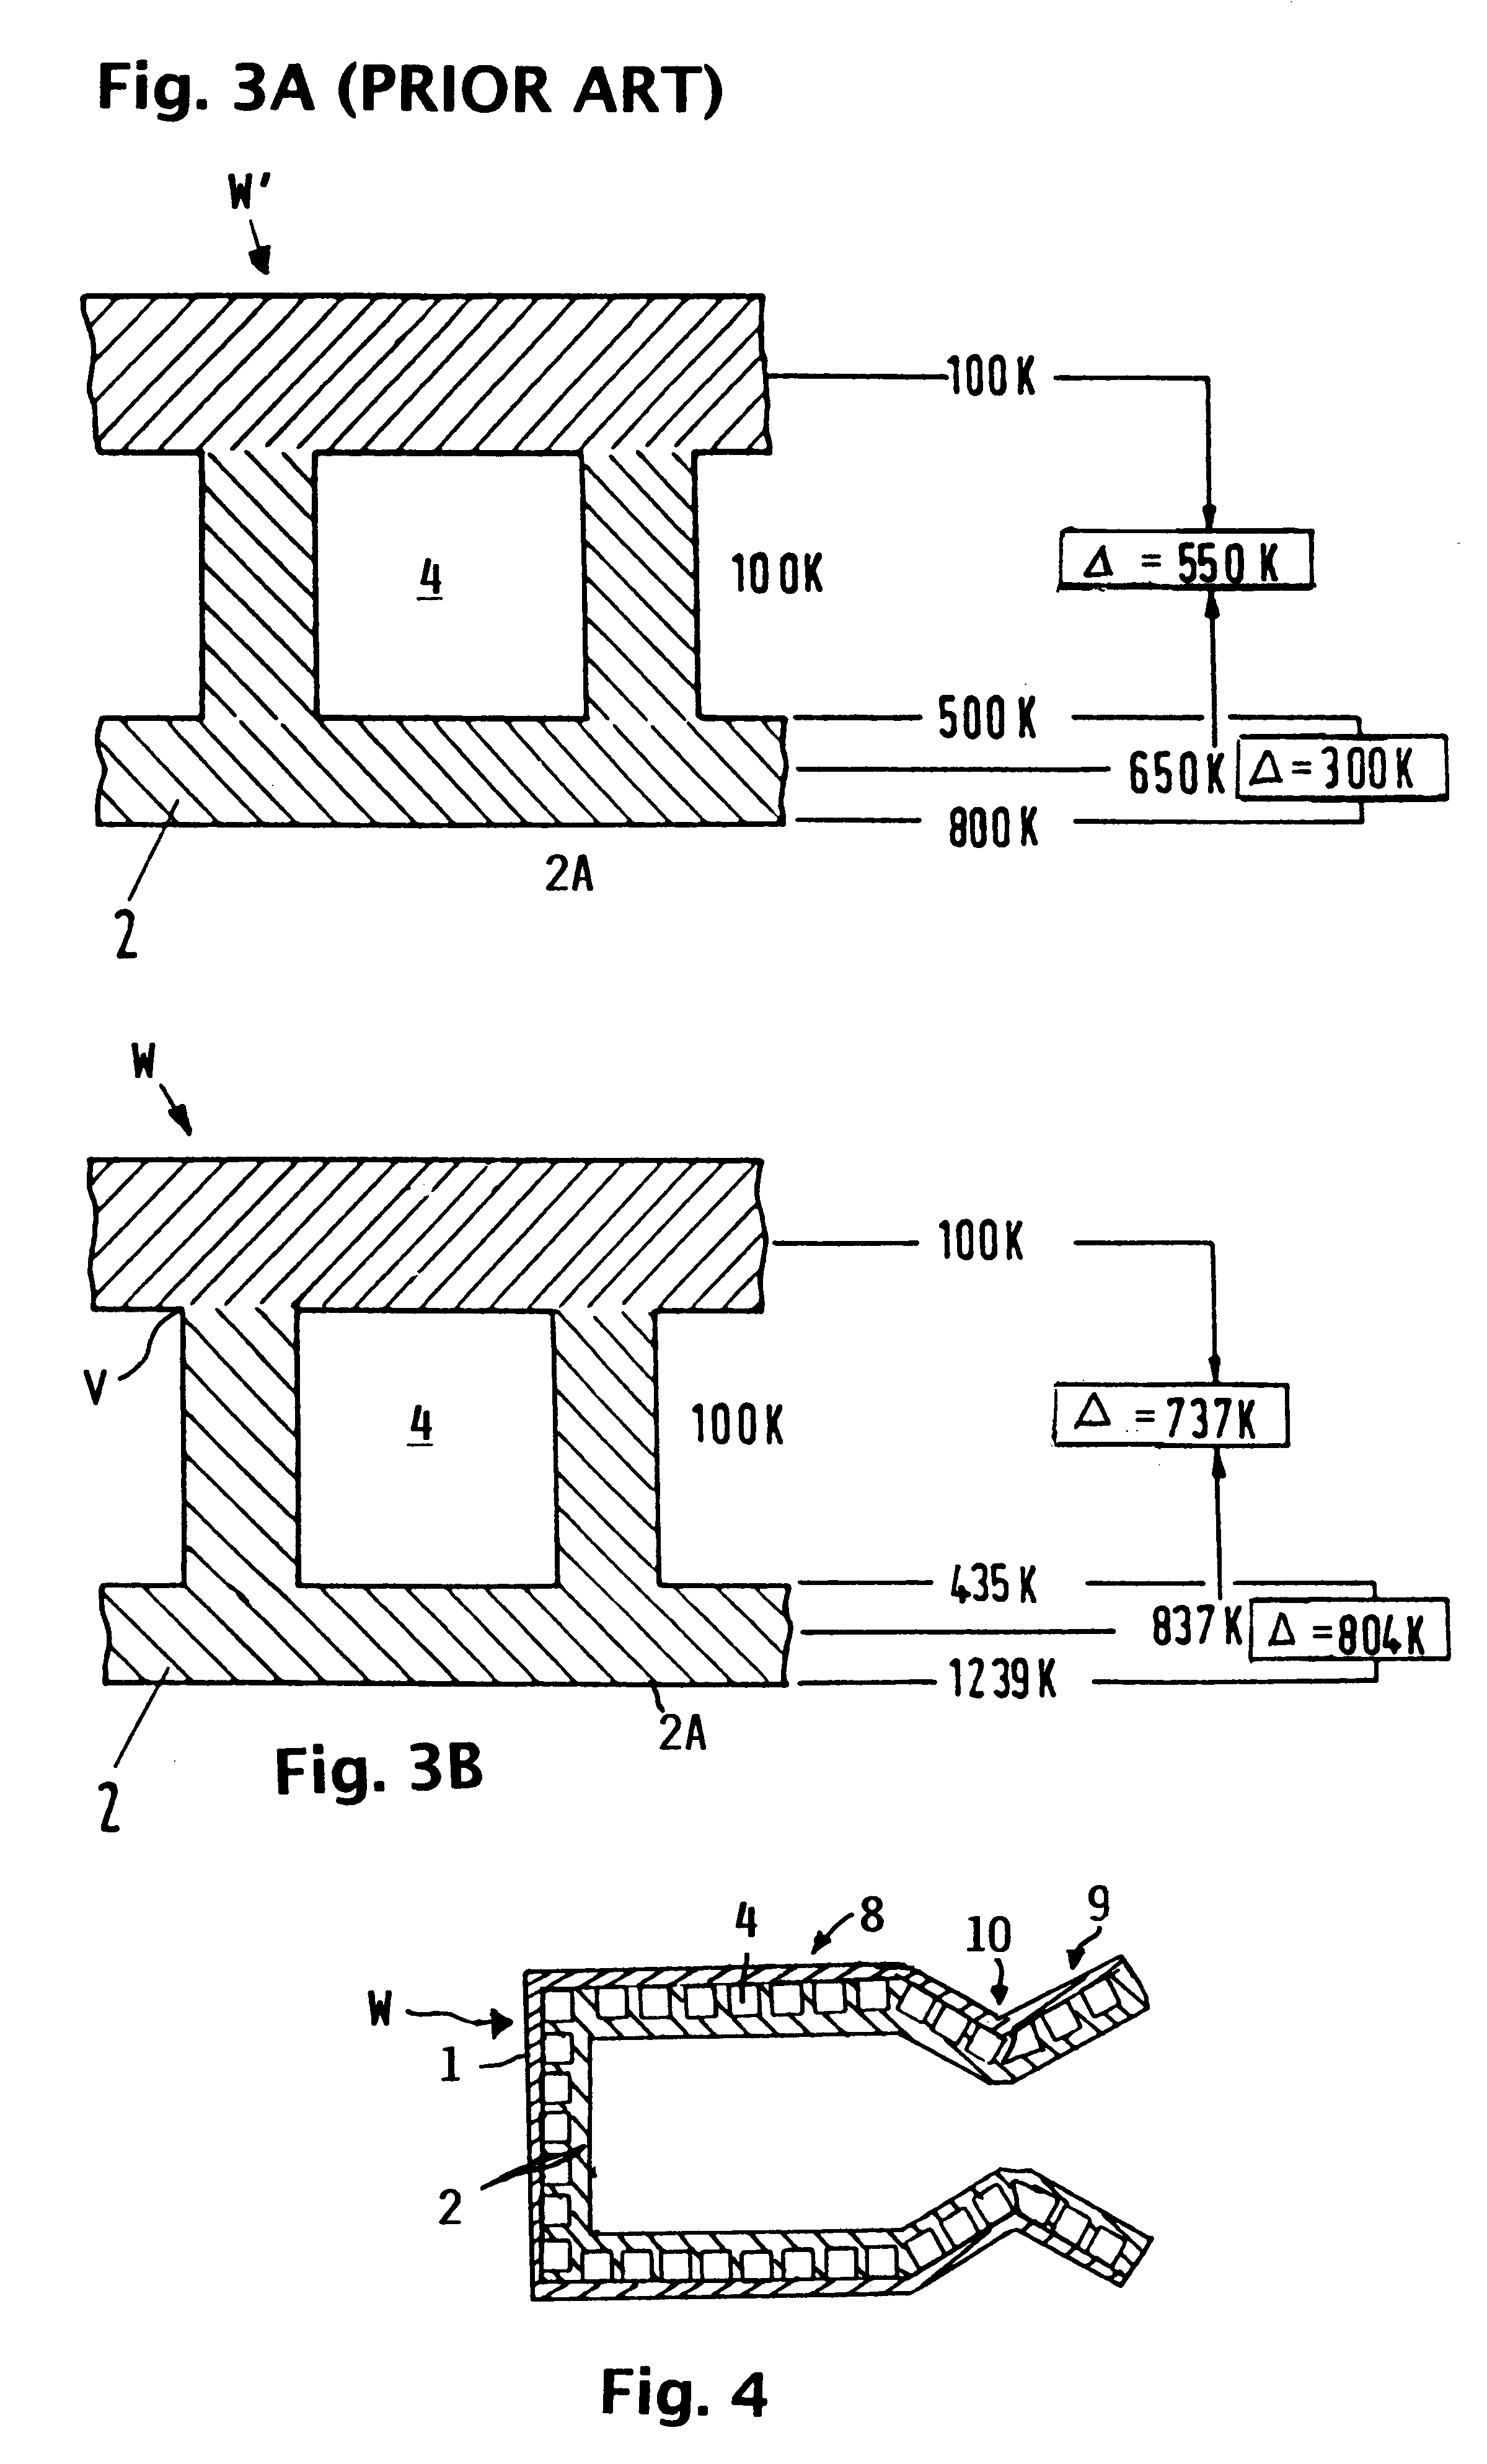 Combustion chamber wall construction for high power engines and thrust nozzles